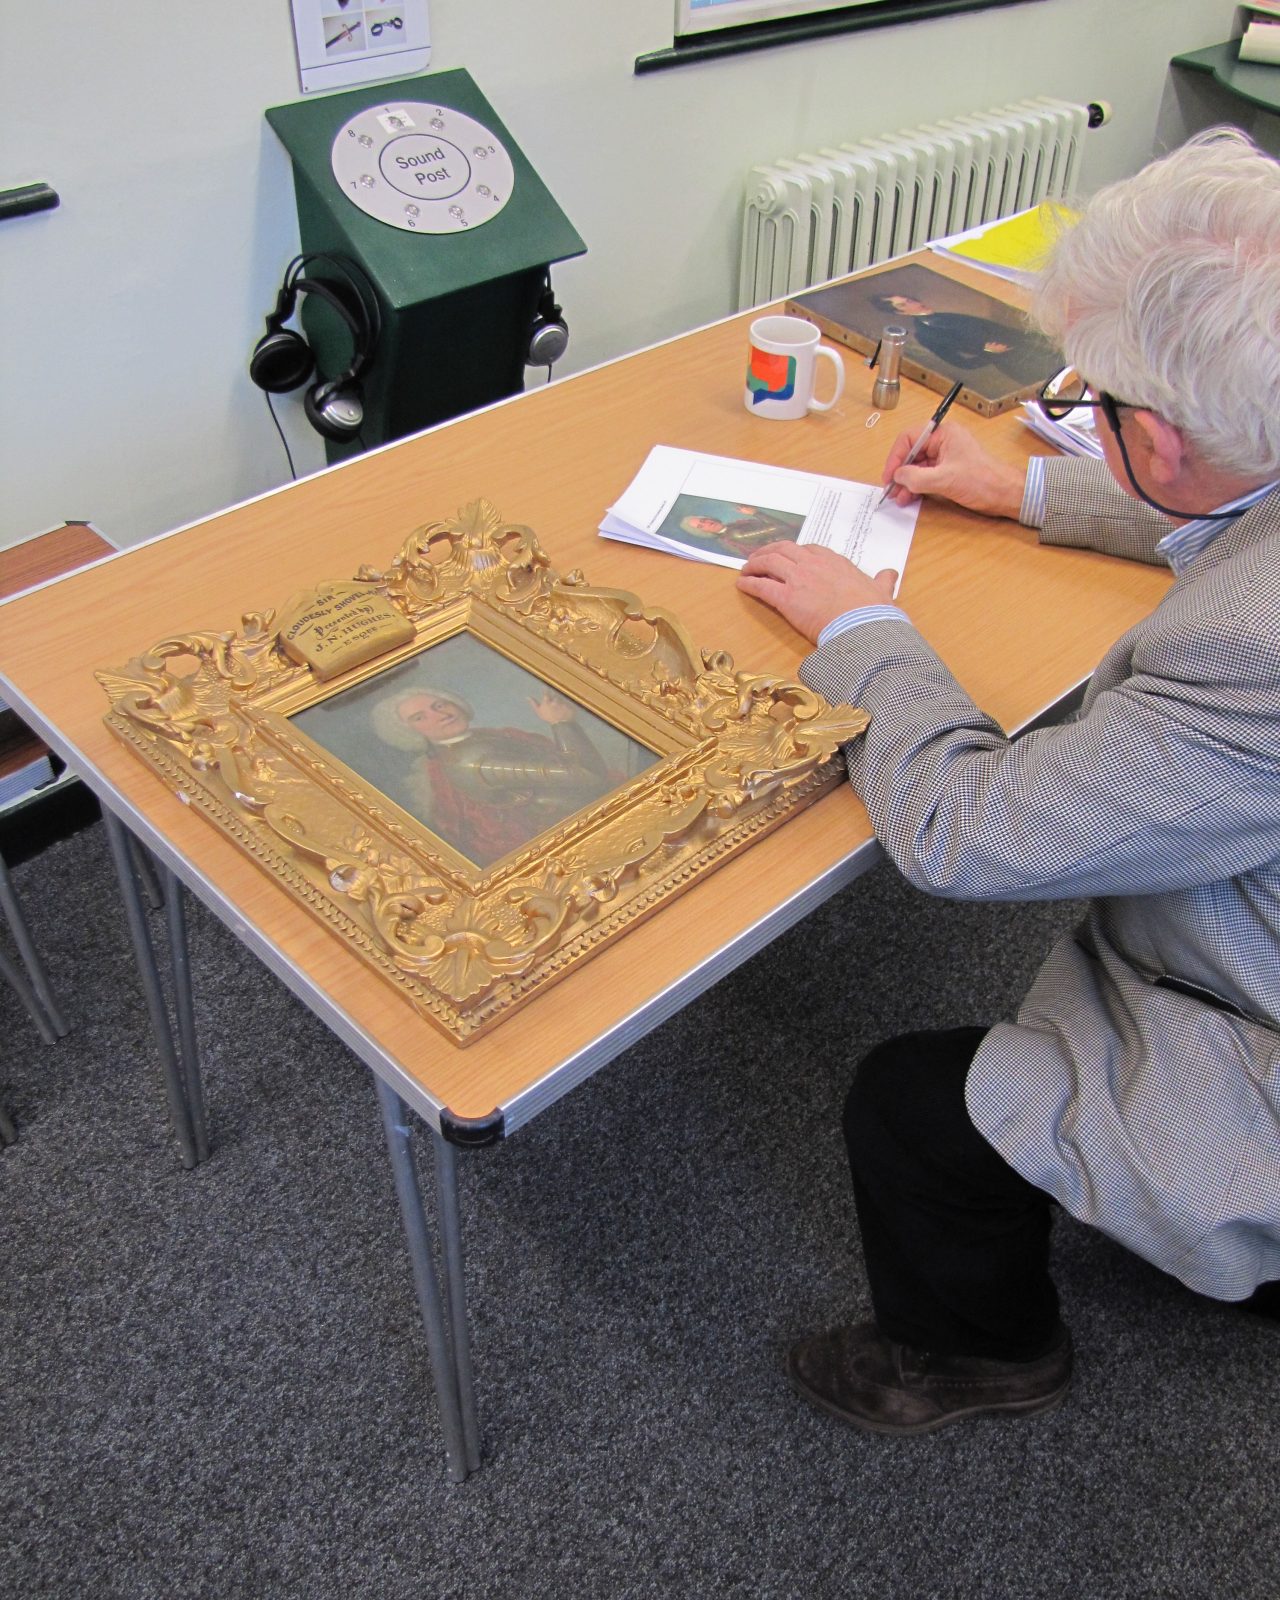 Culvertons' fine art valuer makes notes while examining an oil painting during an art appraisal for insurance purposes.